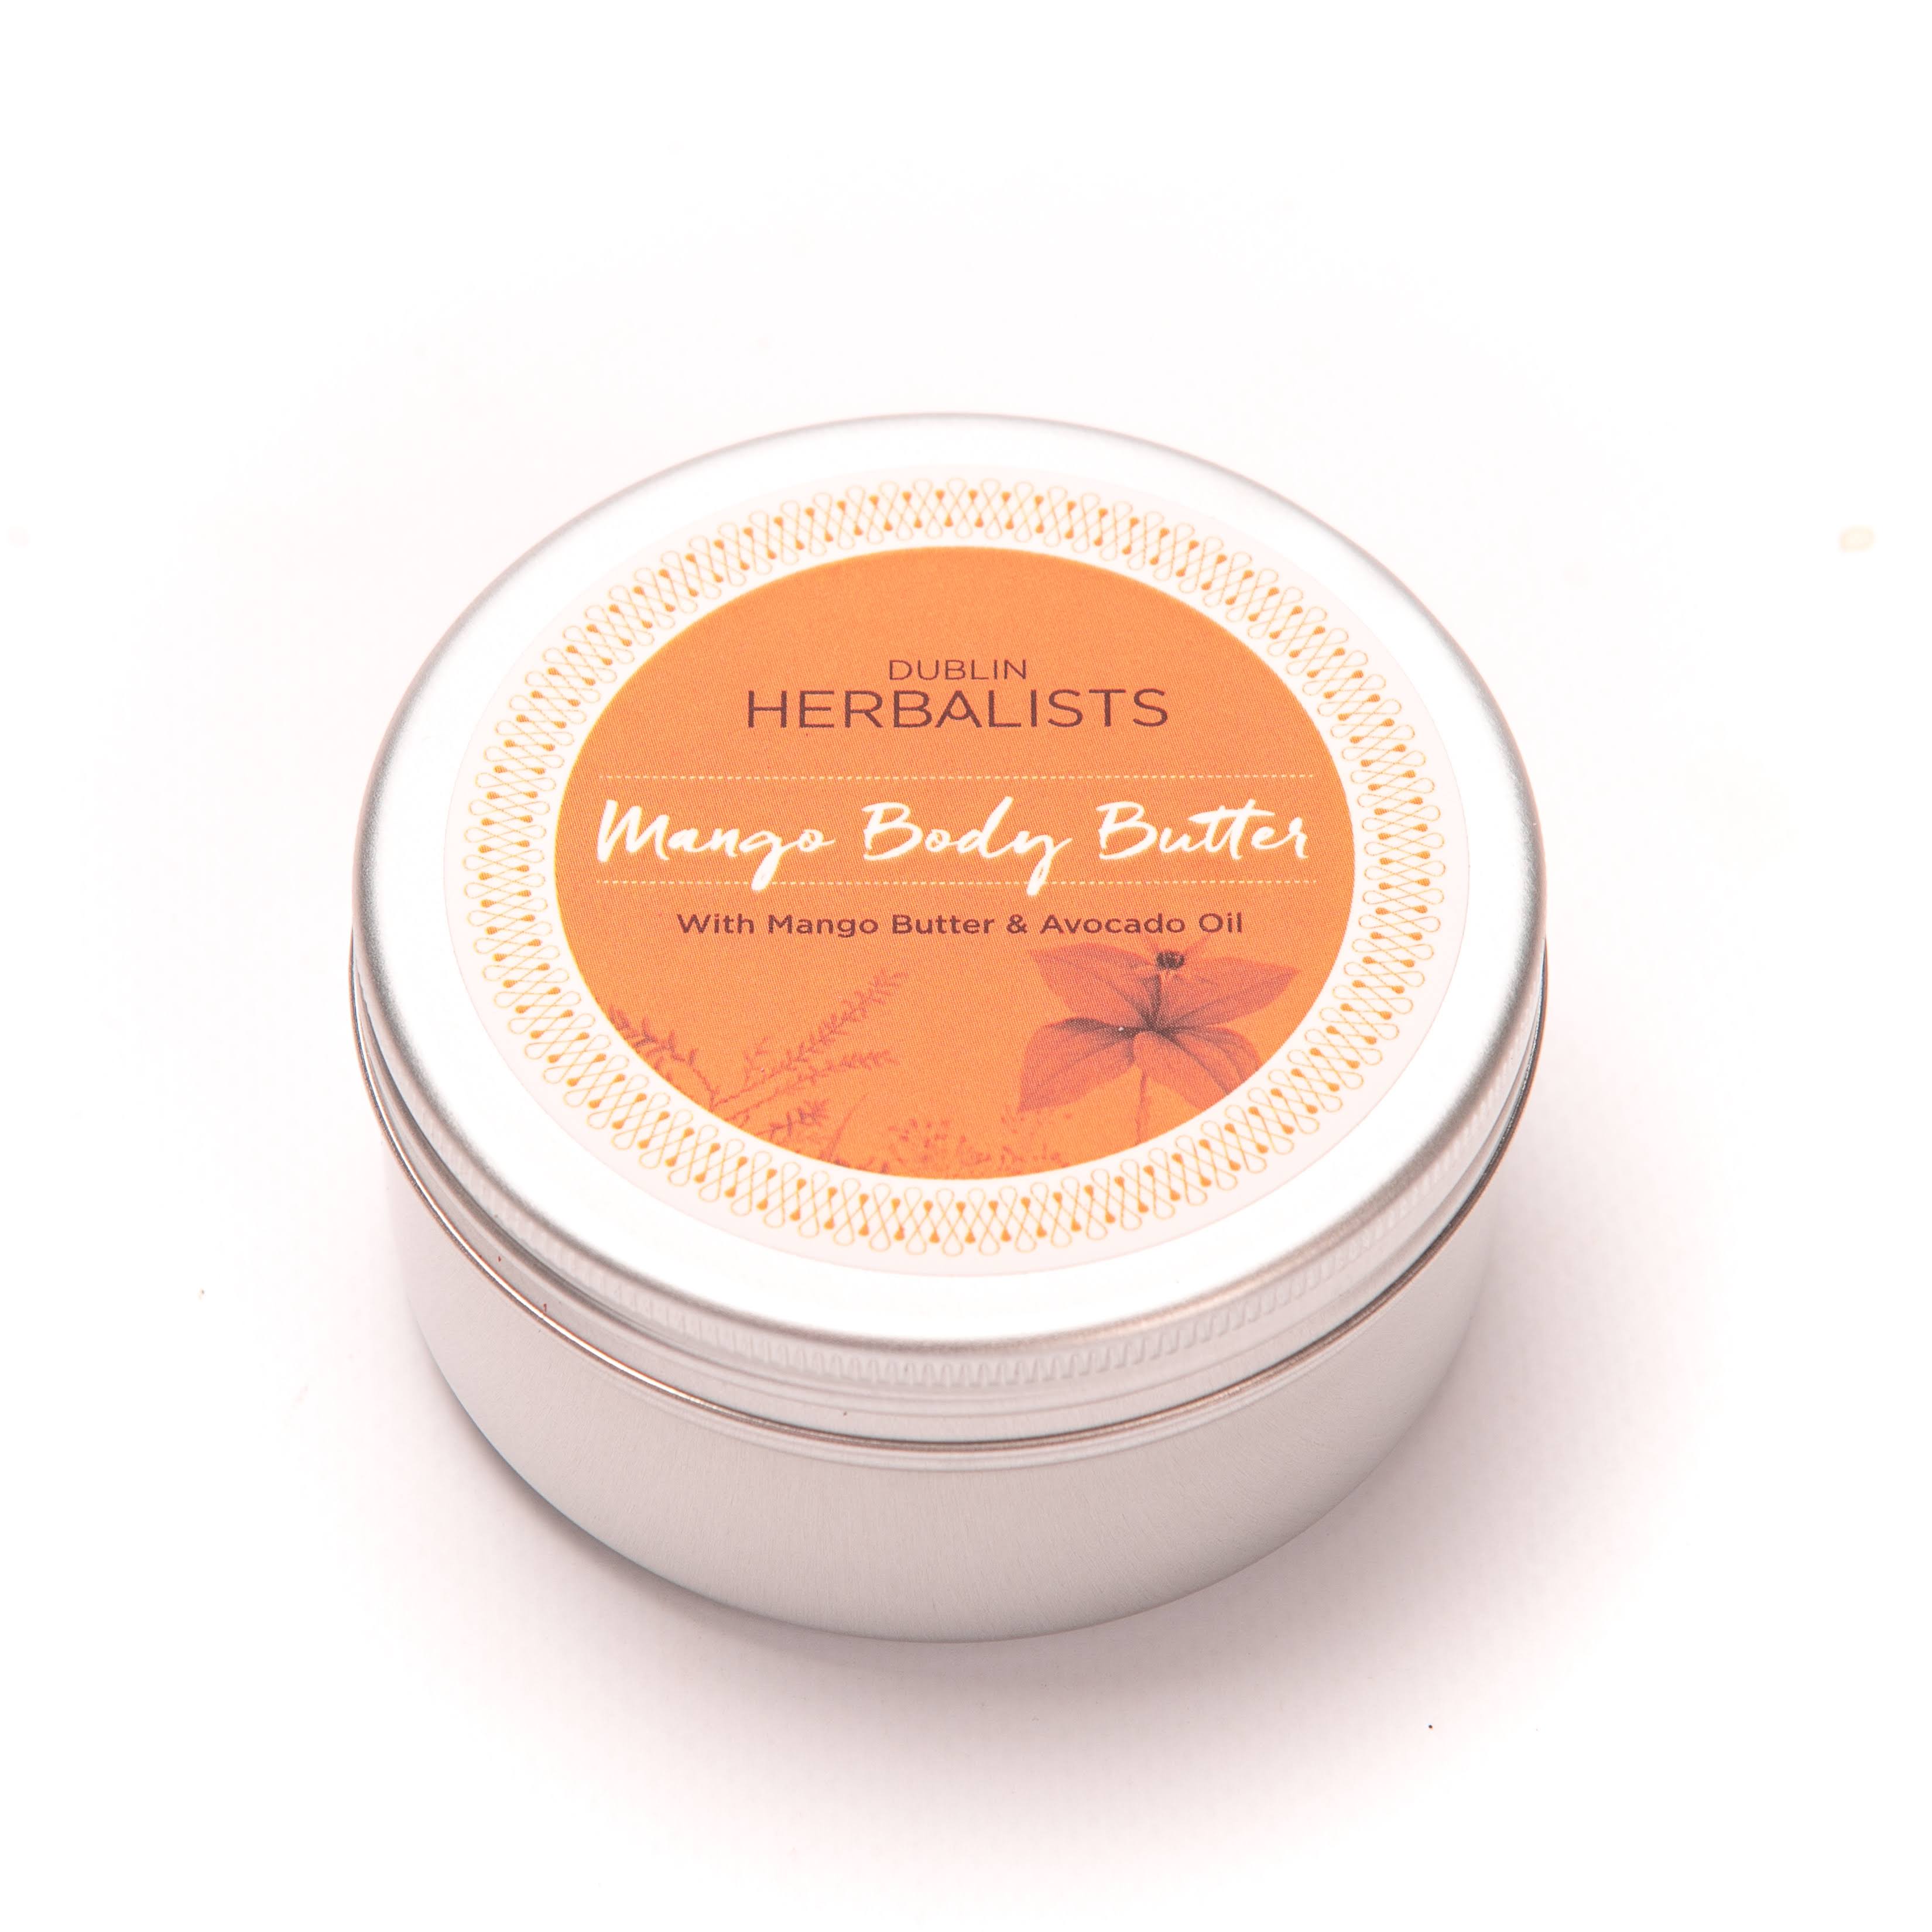 Dublin Herbalists Mango Body Butter with Mango Butter and Avocado Oil